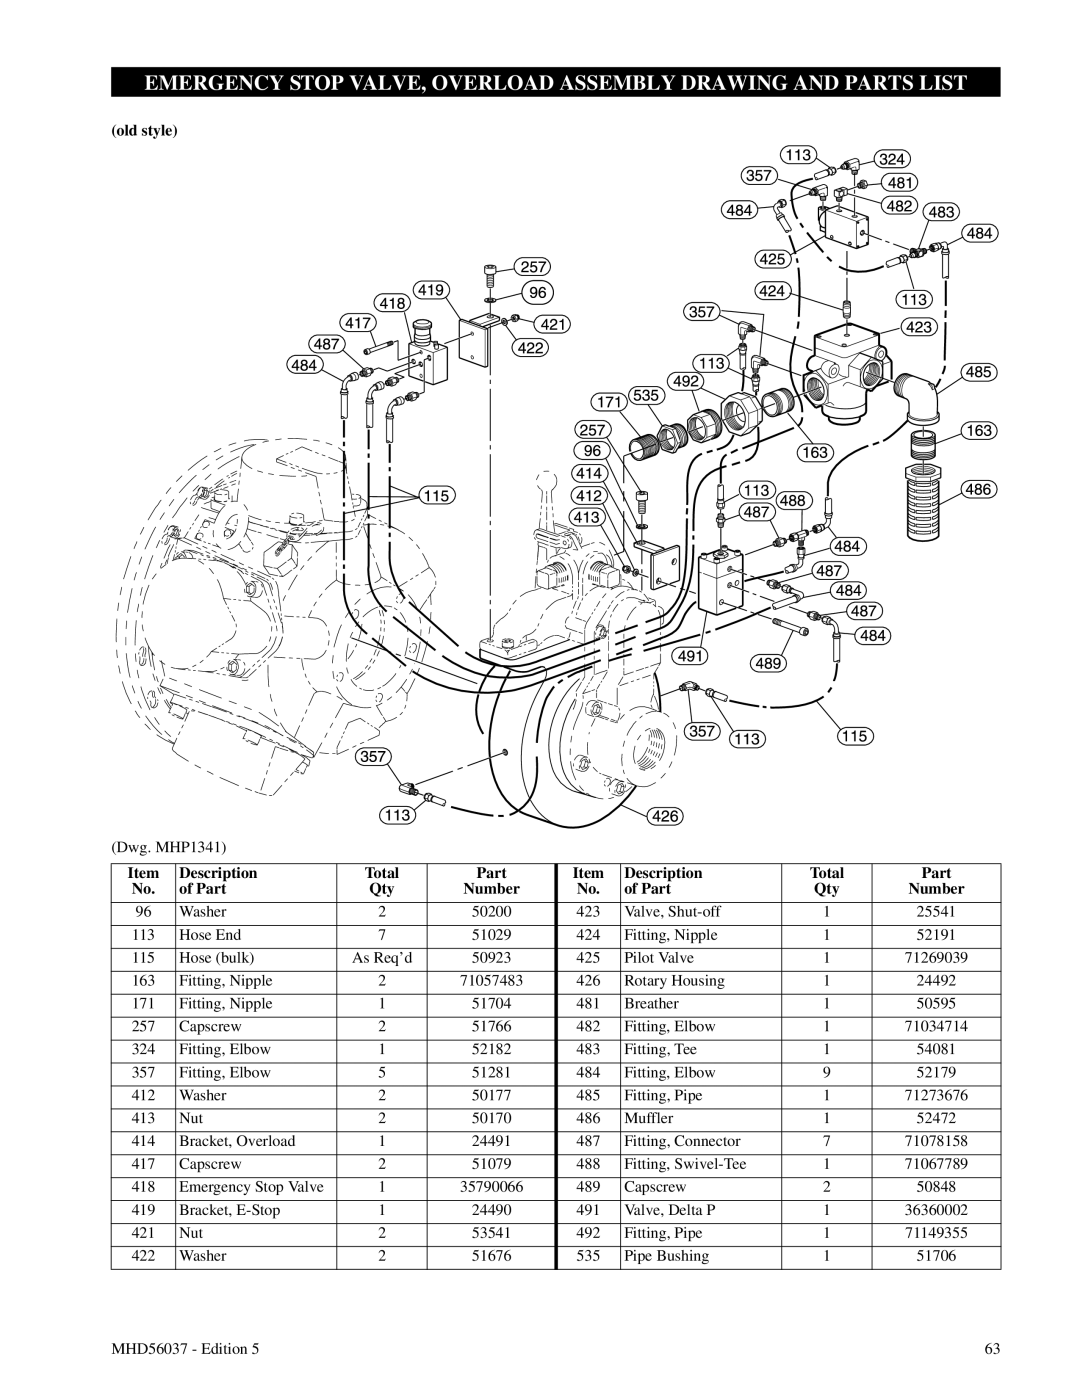 Ingersoll-Rand FA5T manual Emergency Stop Valve, Overload Assembly Drawing And Parts List, old style, Description, of Part 